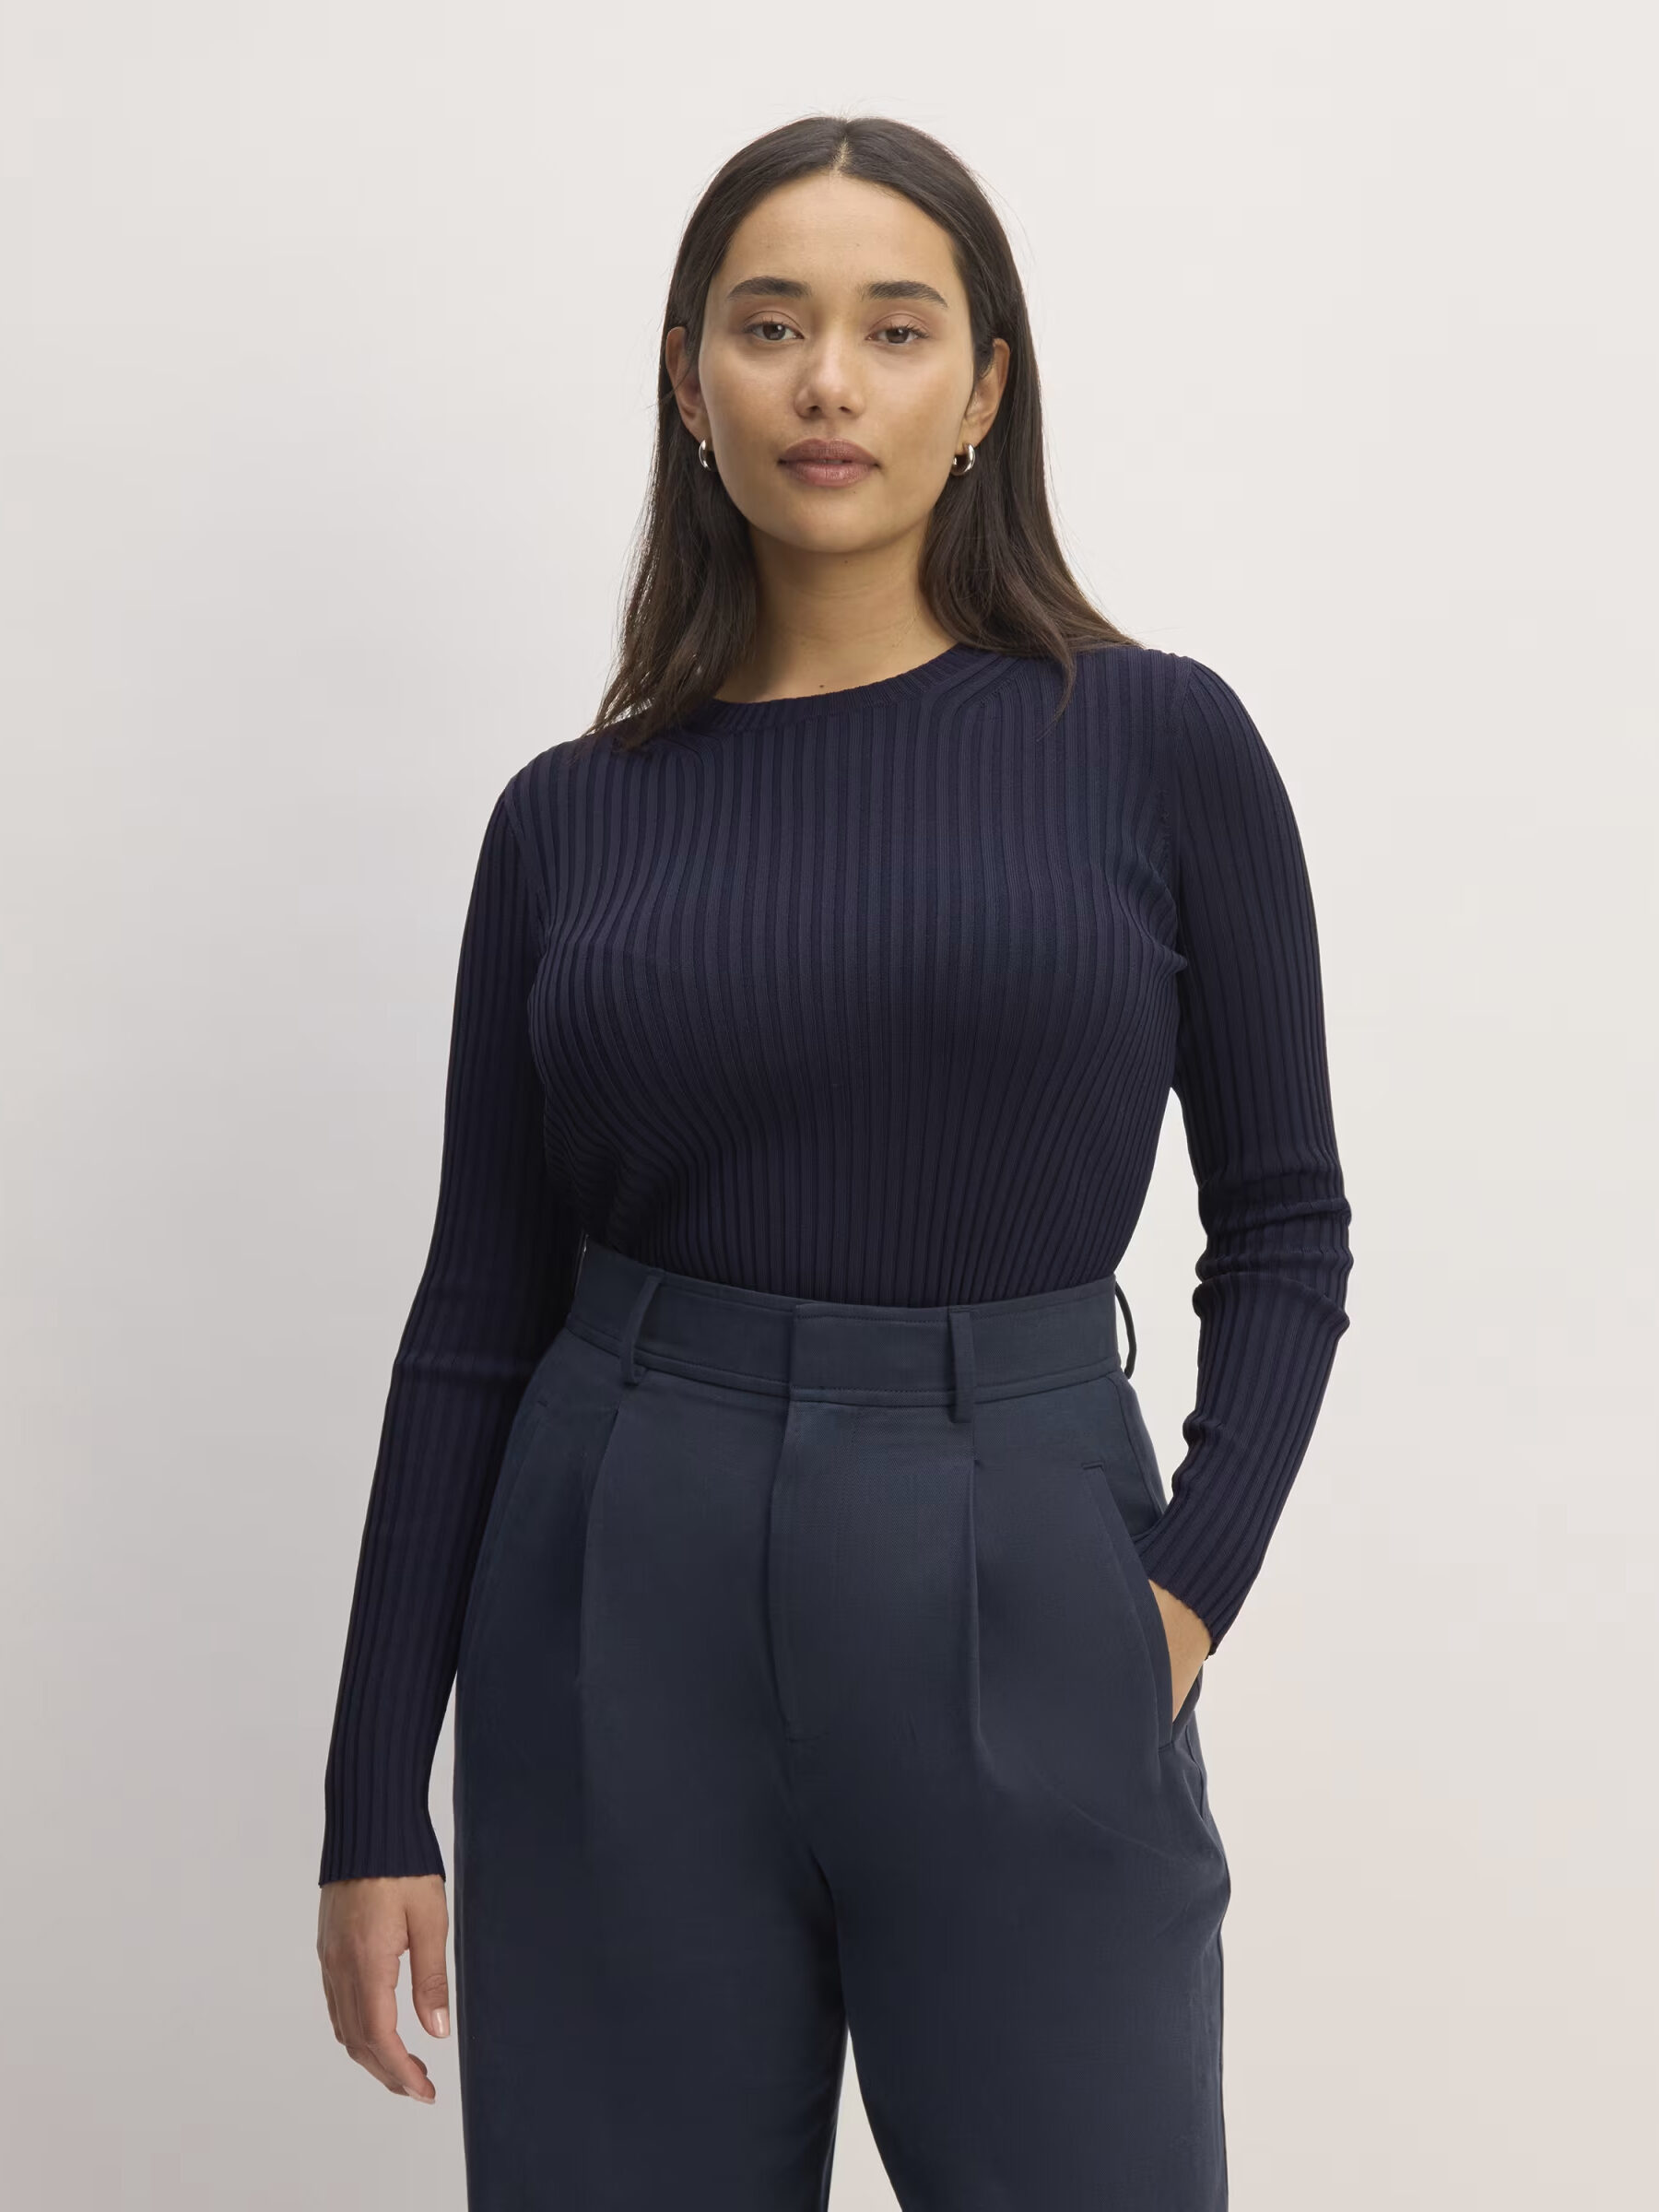 Woman in a navy blue ribbed top and trousers standing against a white background.